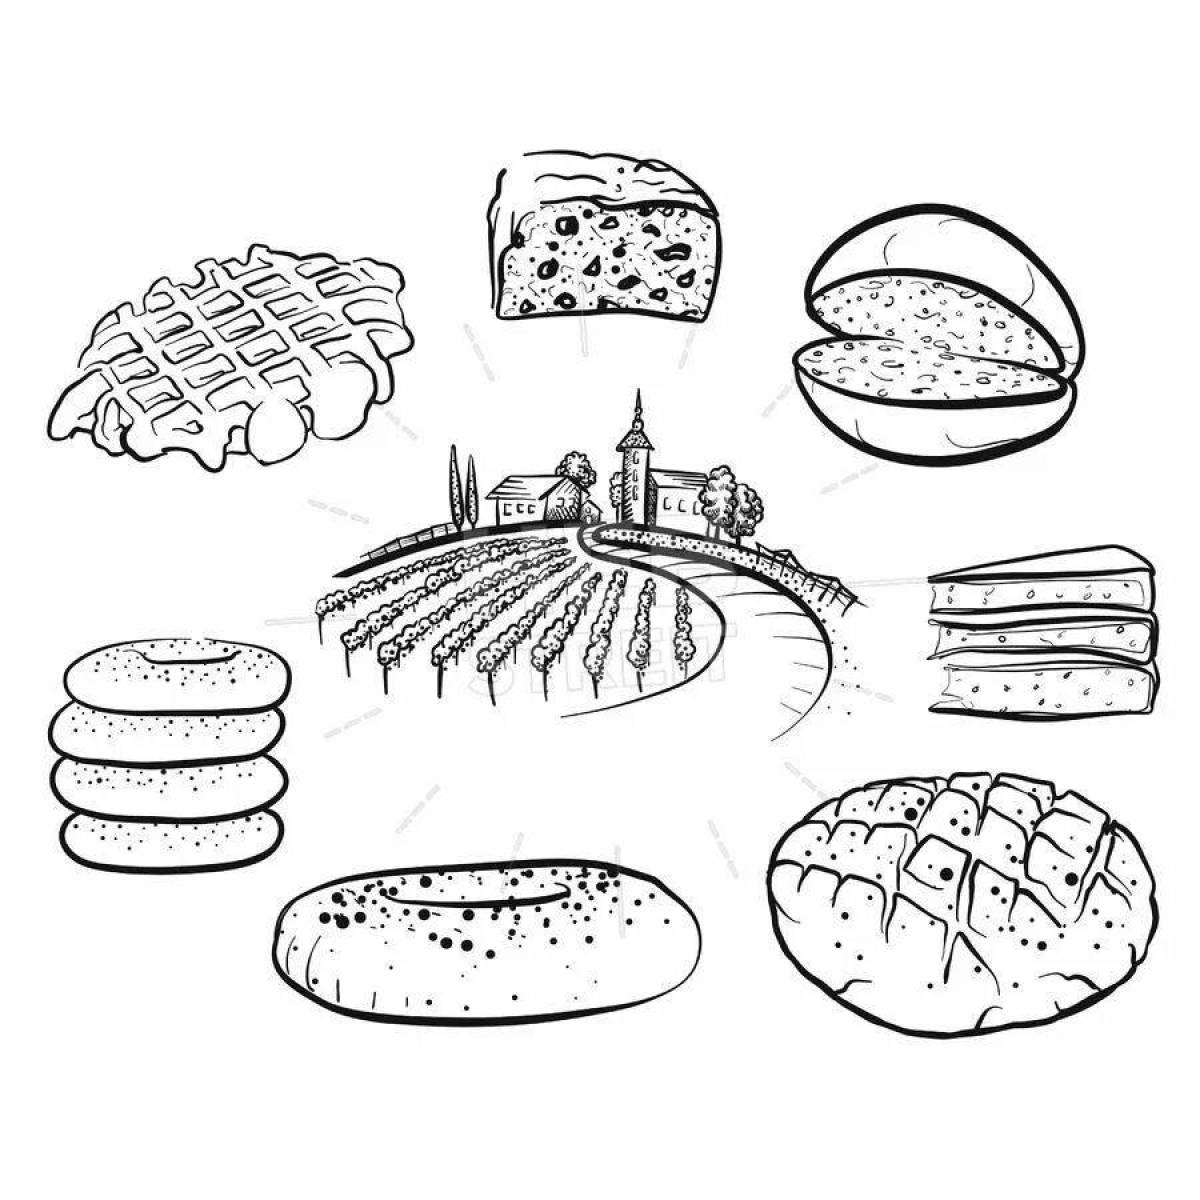 Toasted bread coloring page